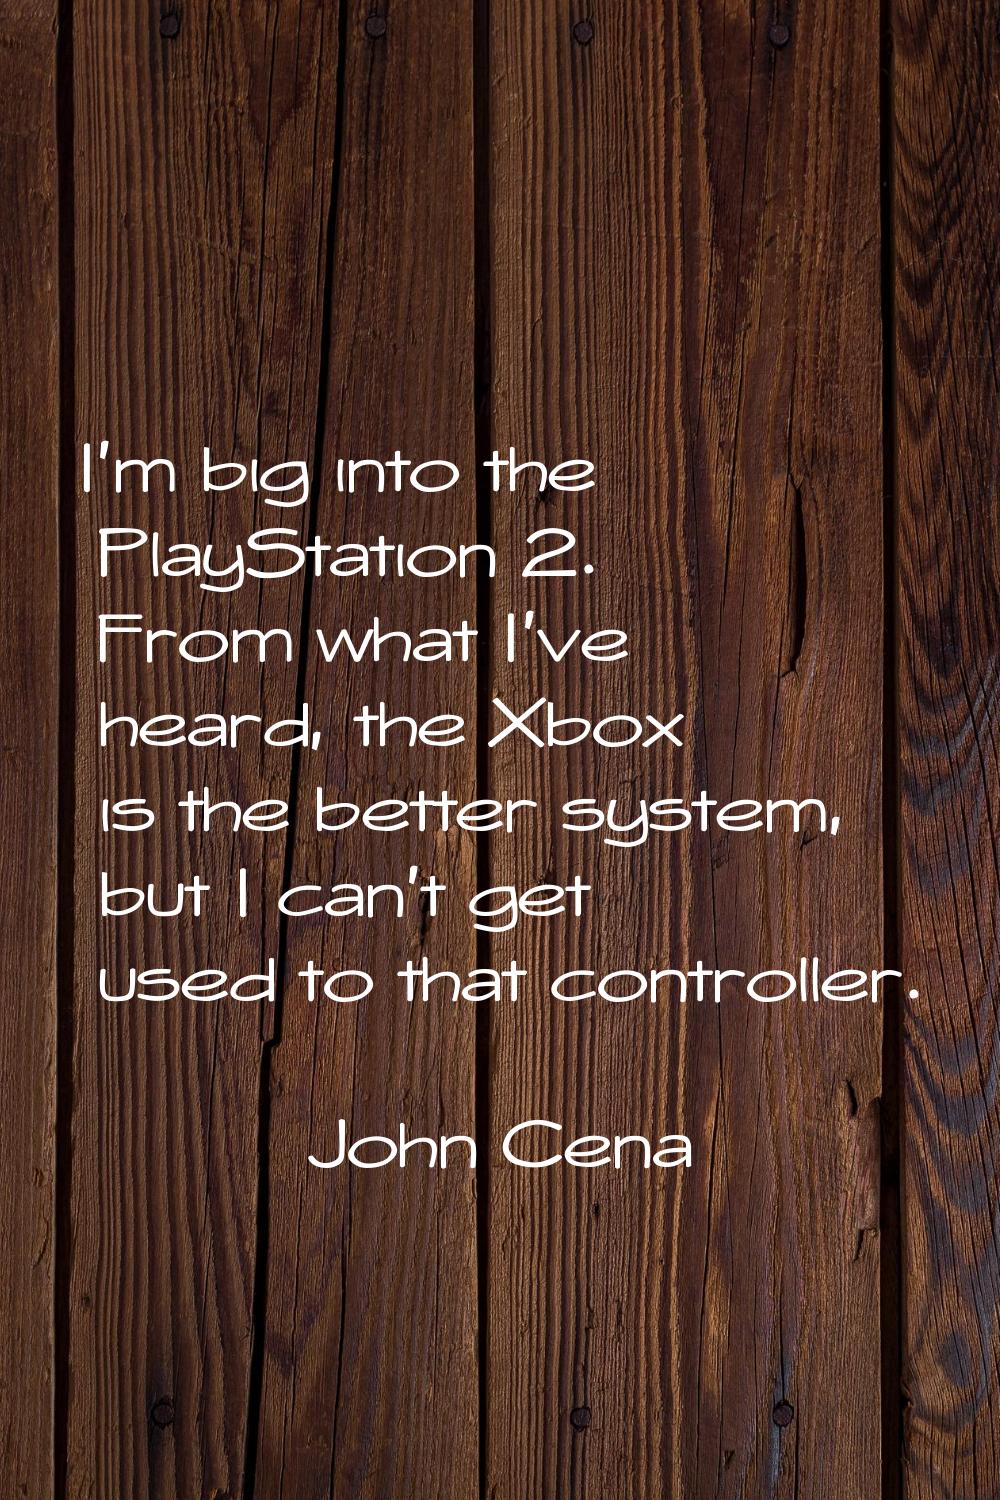 I'm big into the PlayStation 2. From what I've heard, the Xbox is the better system, but I can't ge